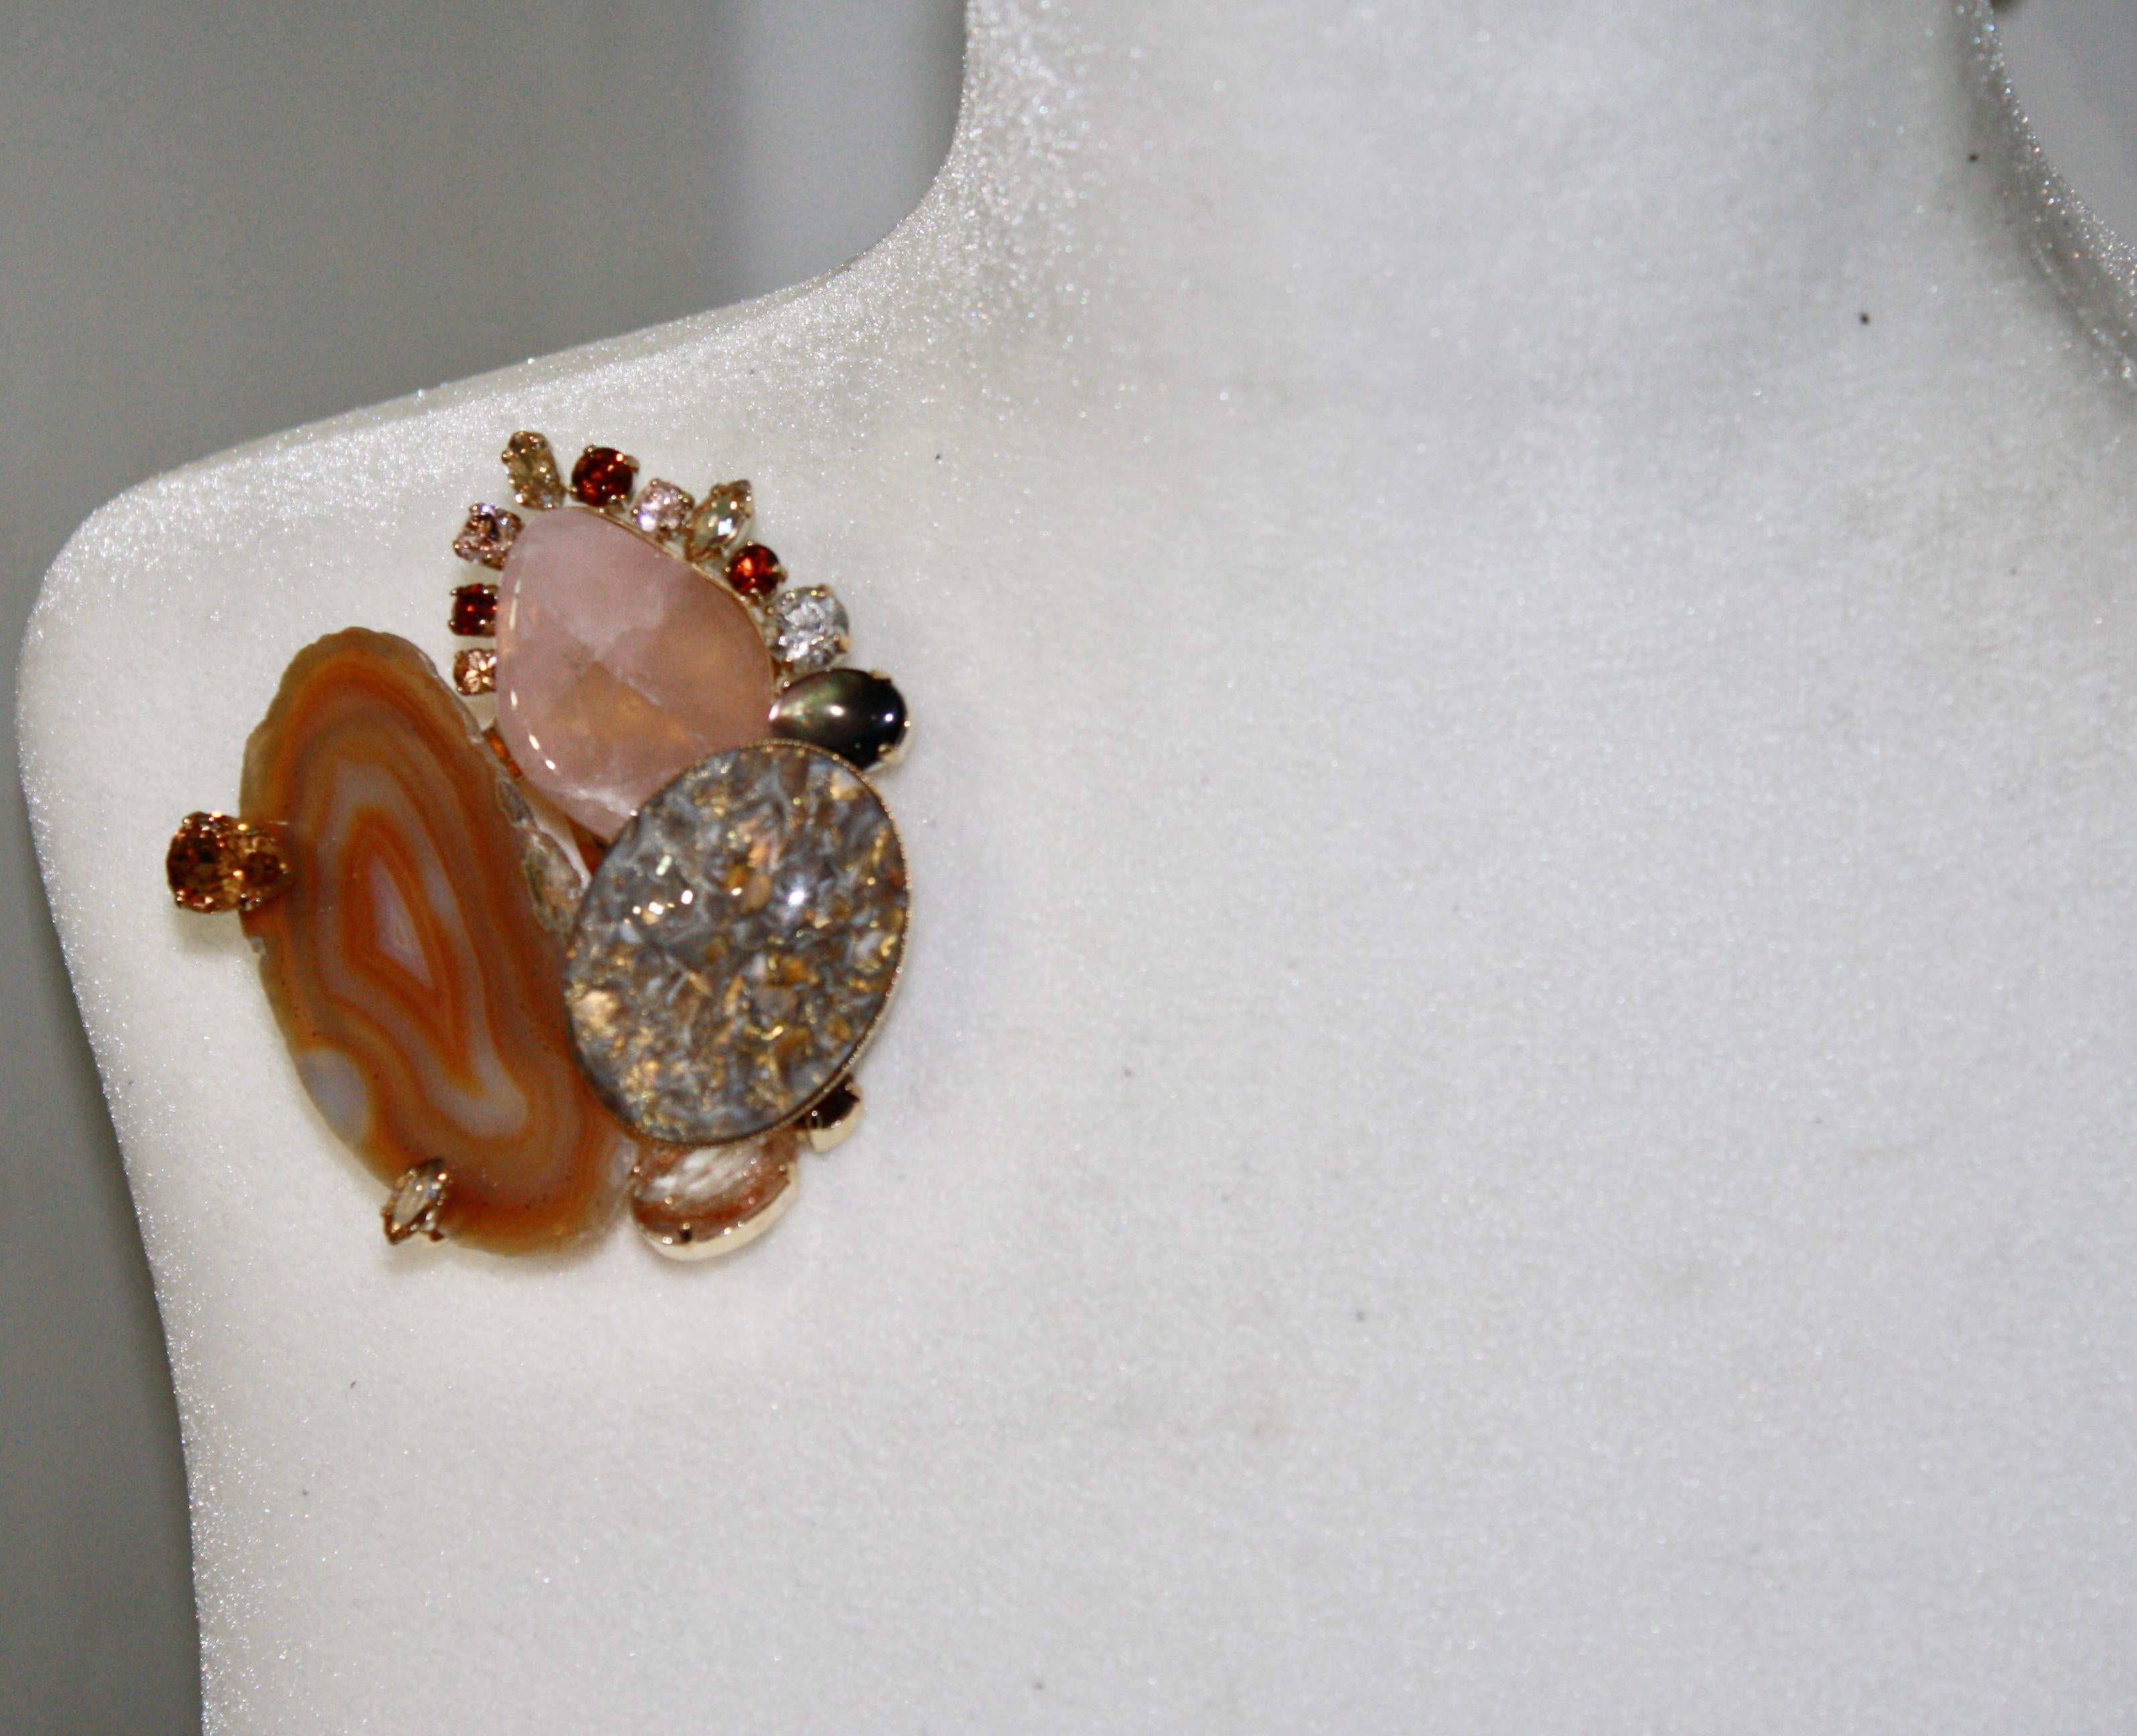 Agate, pink quartz, handmade glass cabochons and Swarovski crystal set on brass plated gold. A hook in the back allows the pin to be worn as a pendant.